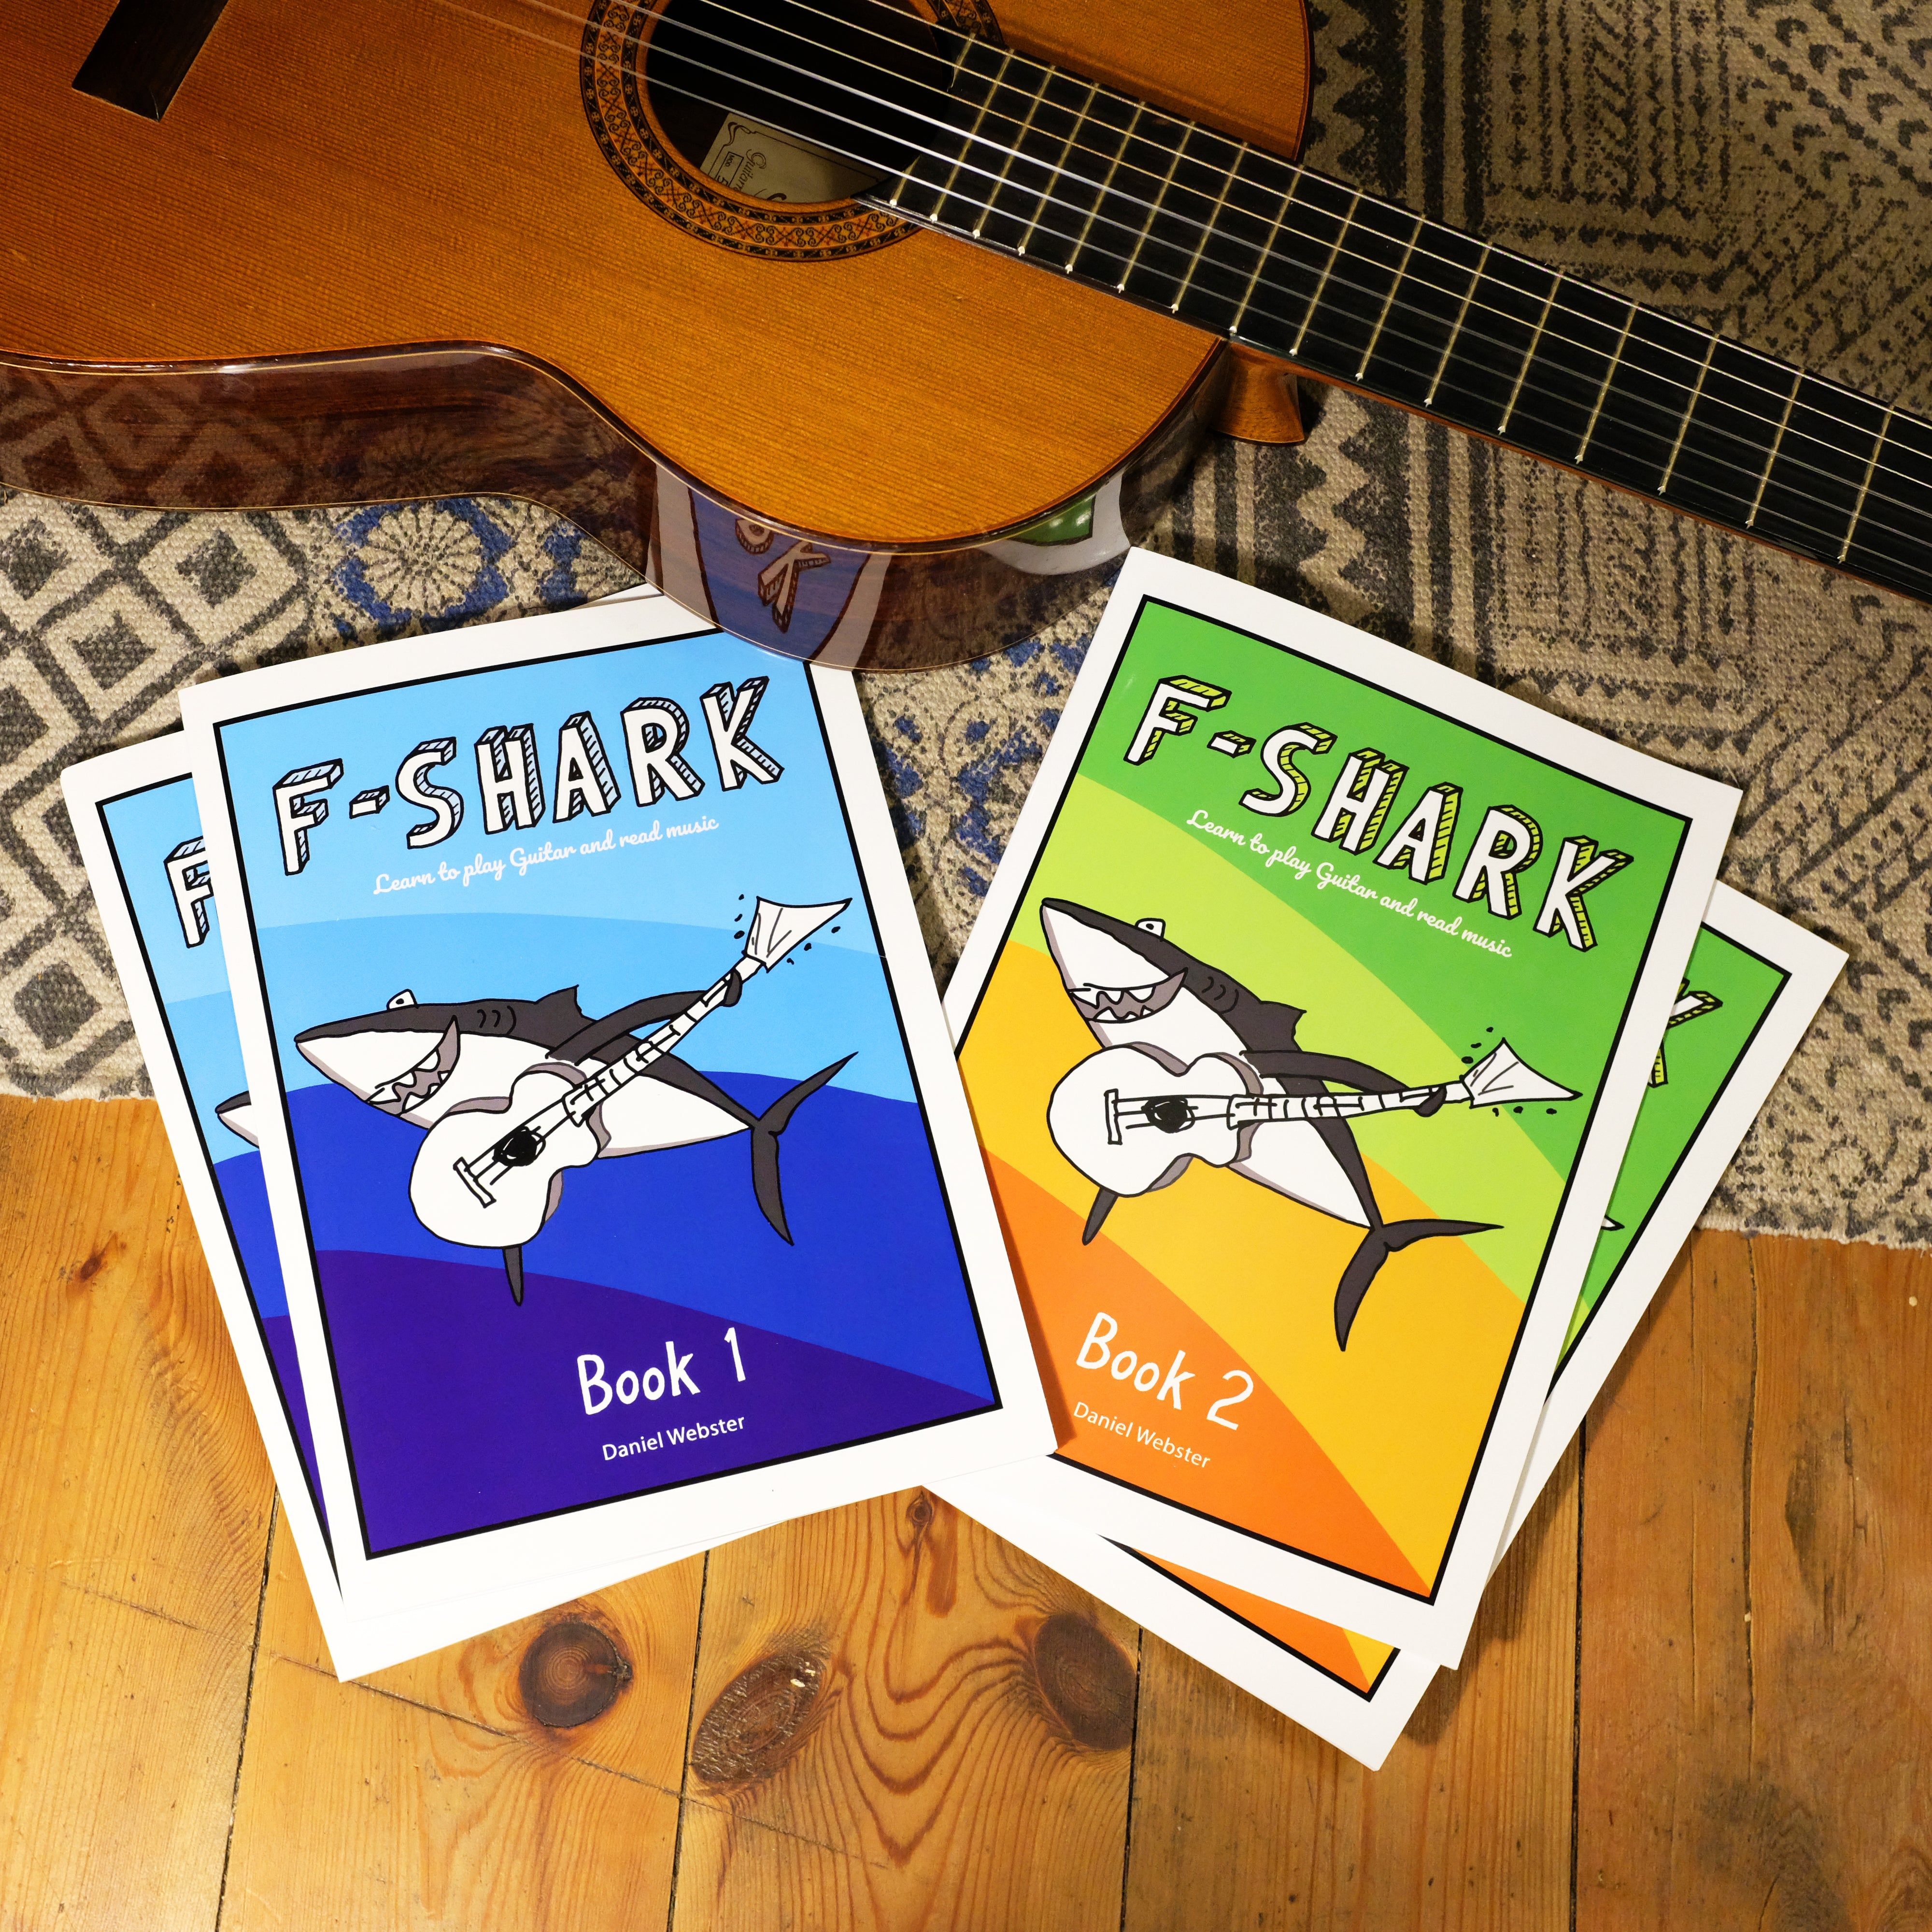 Local Guitar Books Now in Stock!